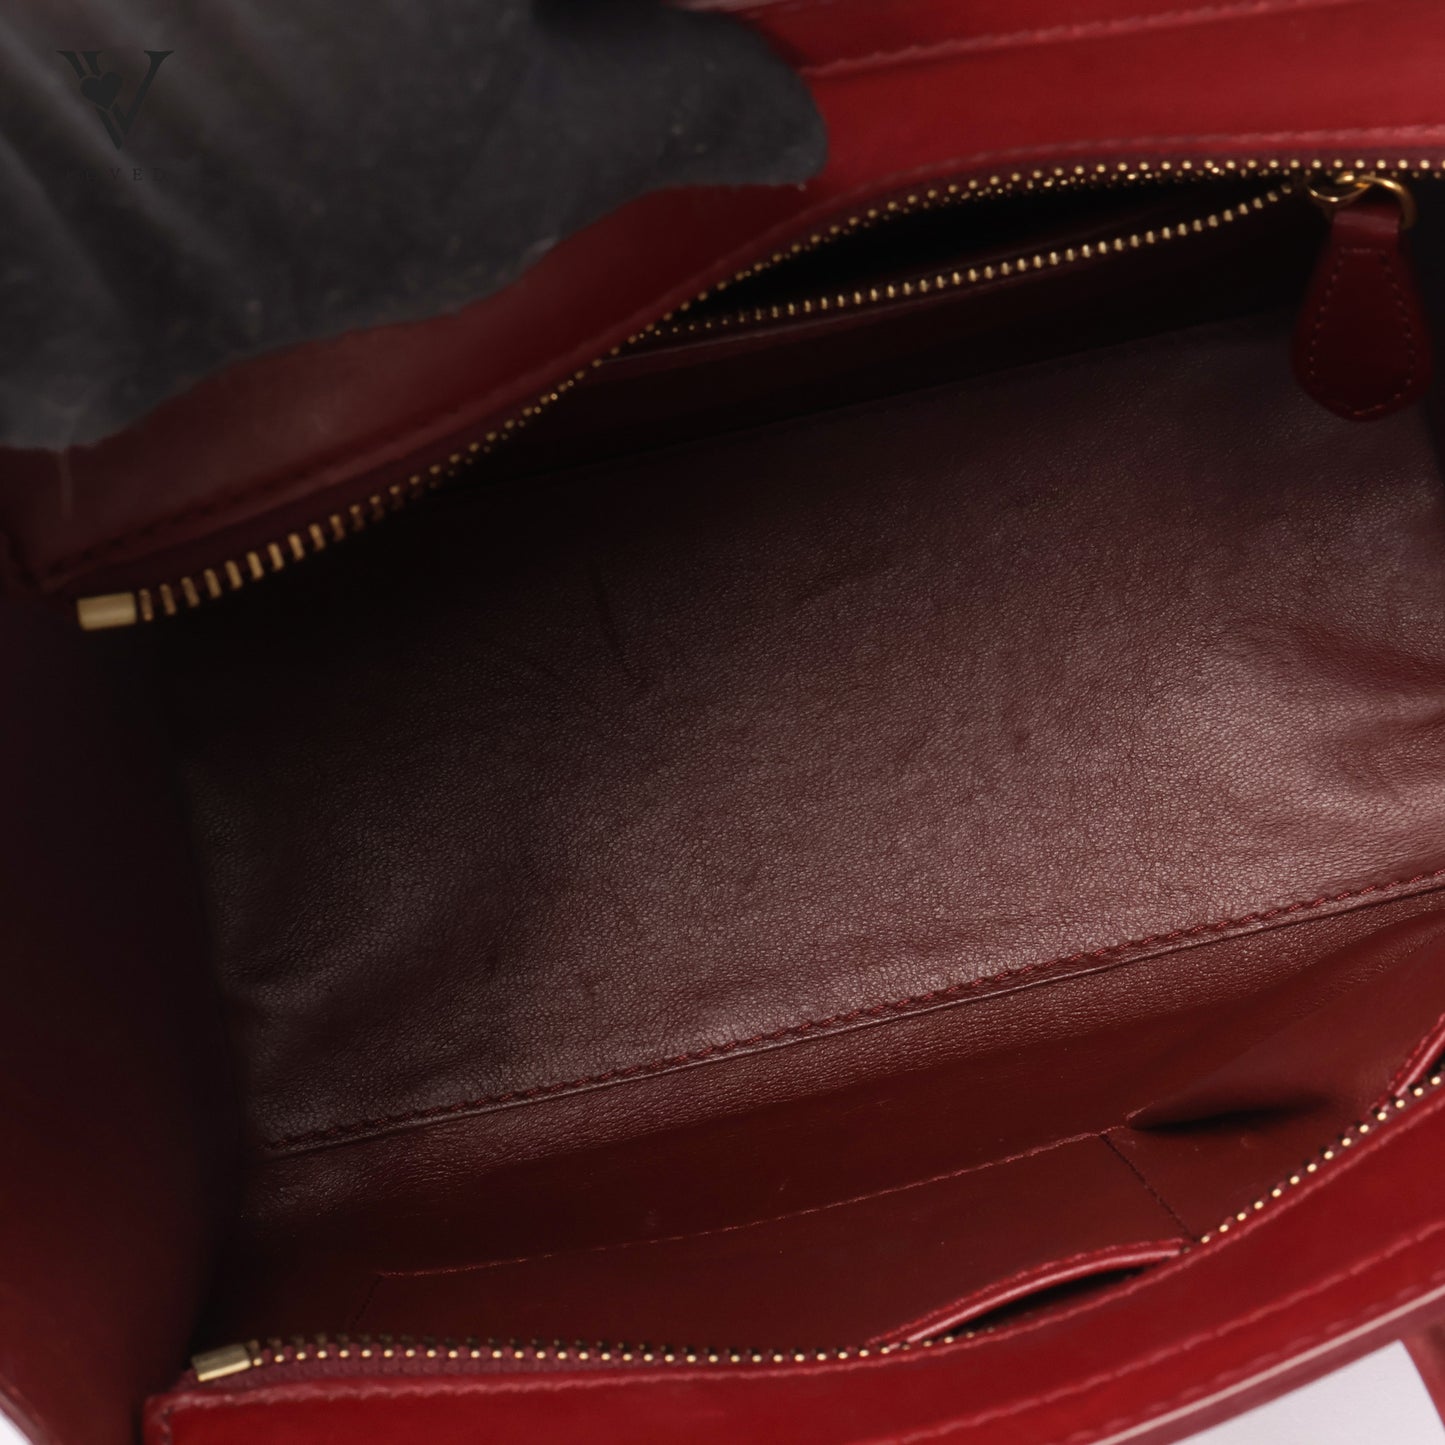 Micro Luggage in Smooth Calfskin Leather